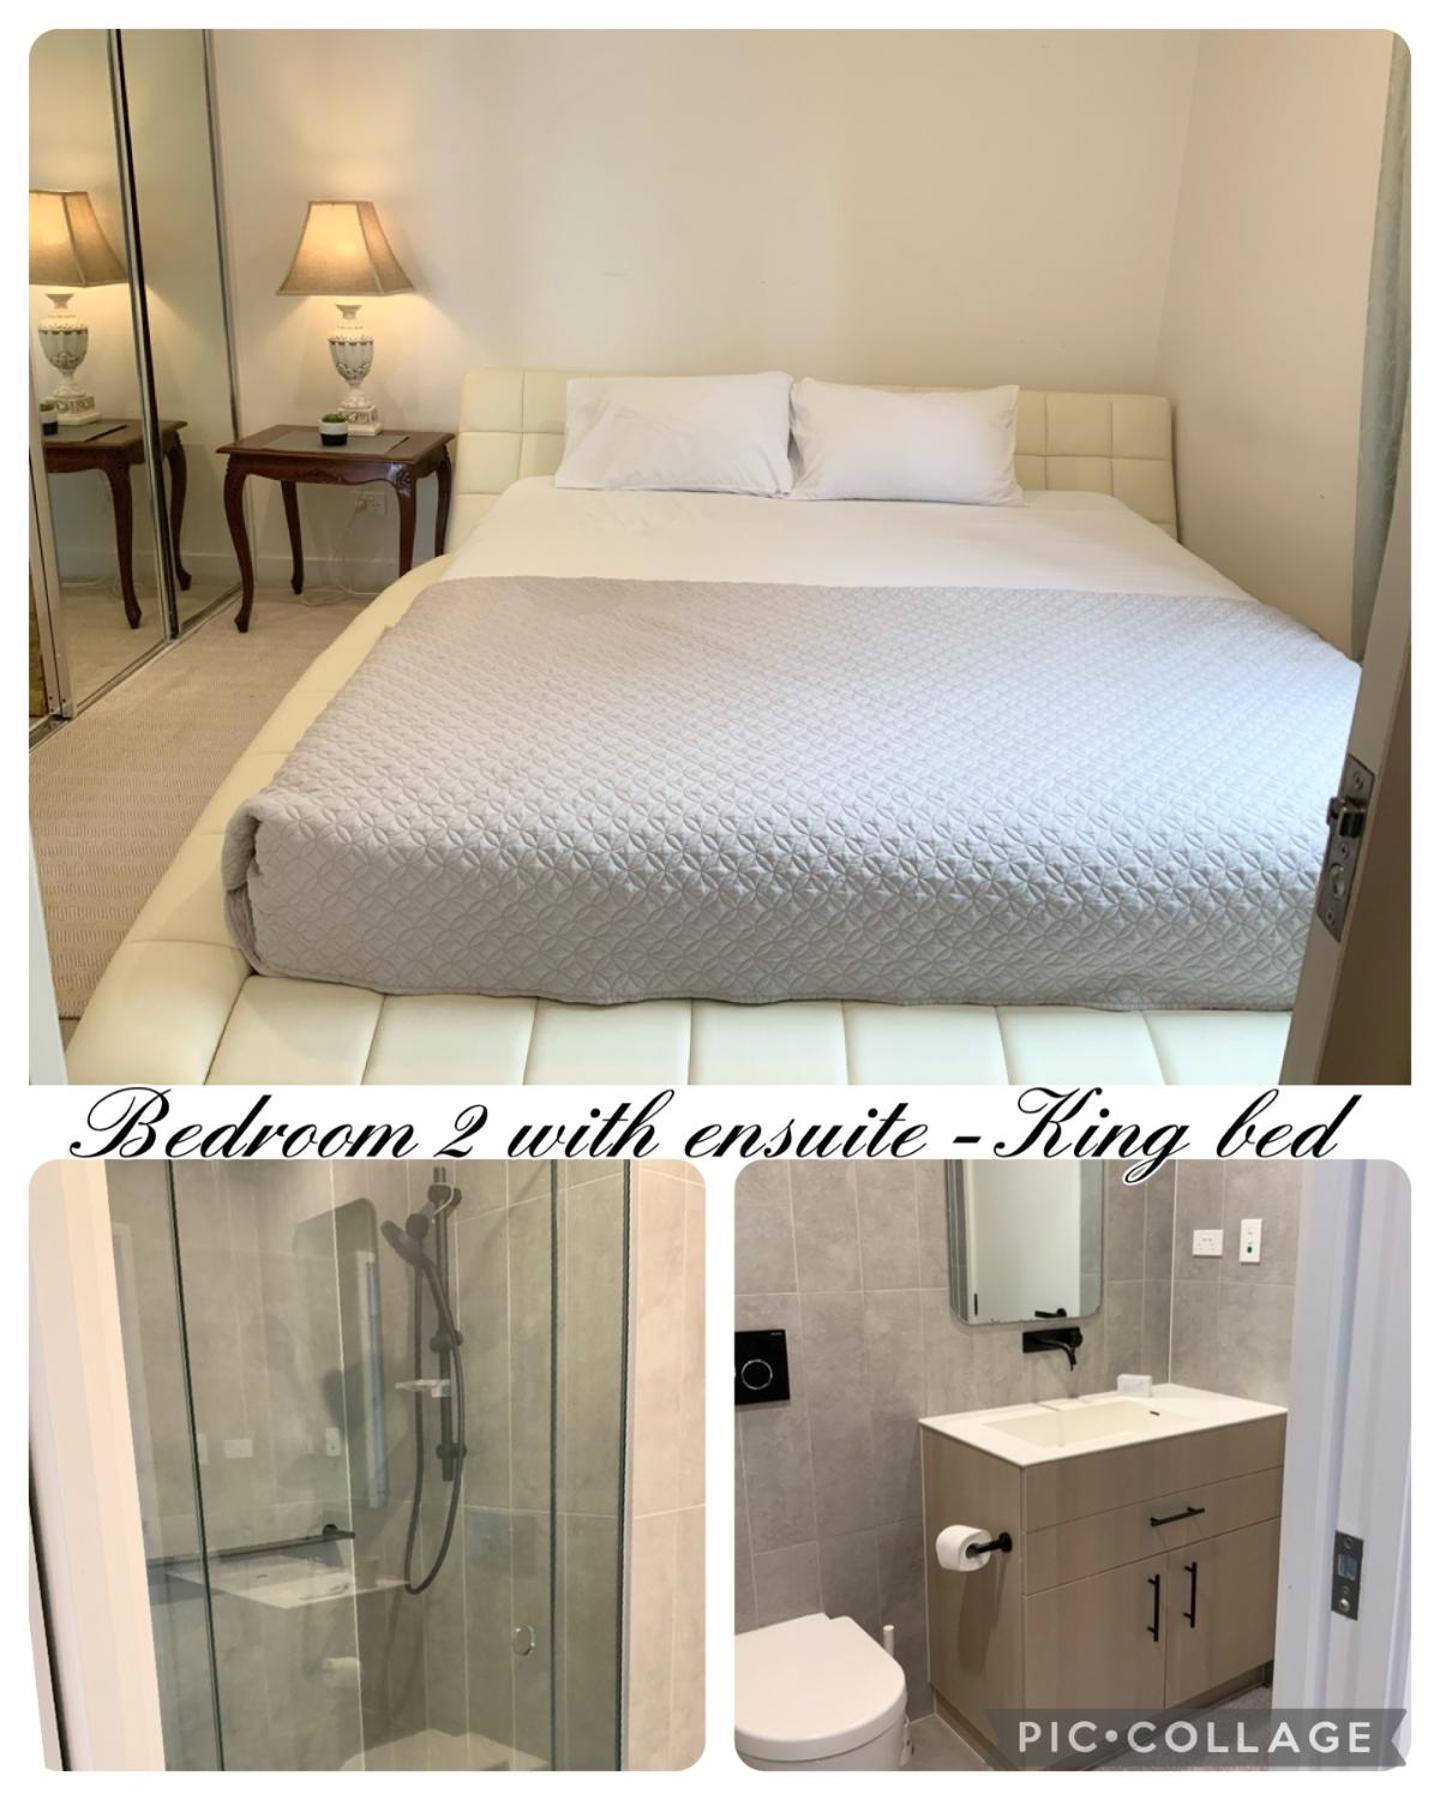 M-City Apartment - Executive Twin King Ensuites - Fully Equipped - Free Parking, Fast Wifi, Smart Tv, Netflix, Complementary Drinks & Amenities - M-City Shopping Centre Clayton 3168 Εξωτερικό φωτογραφία